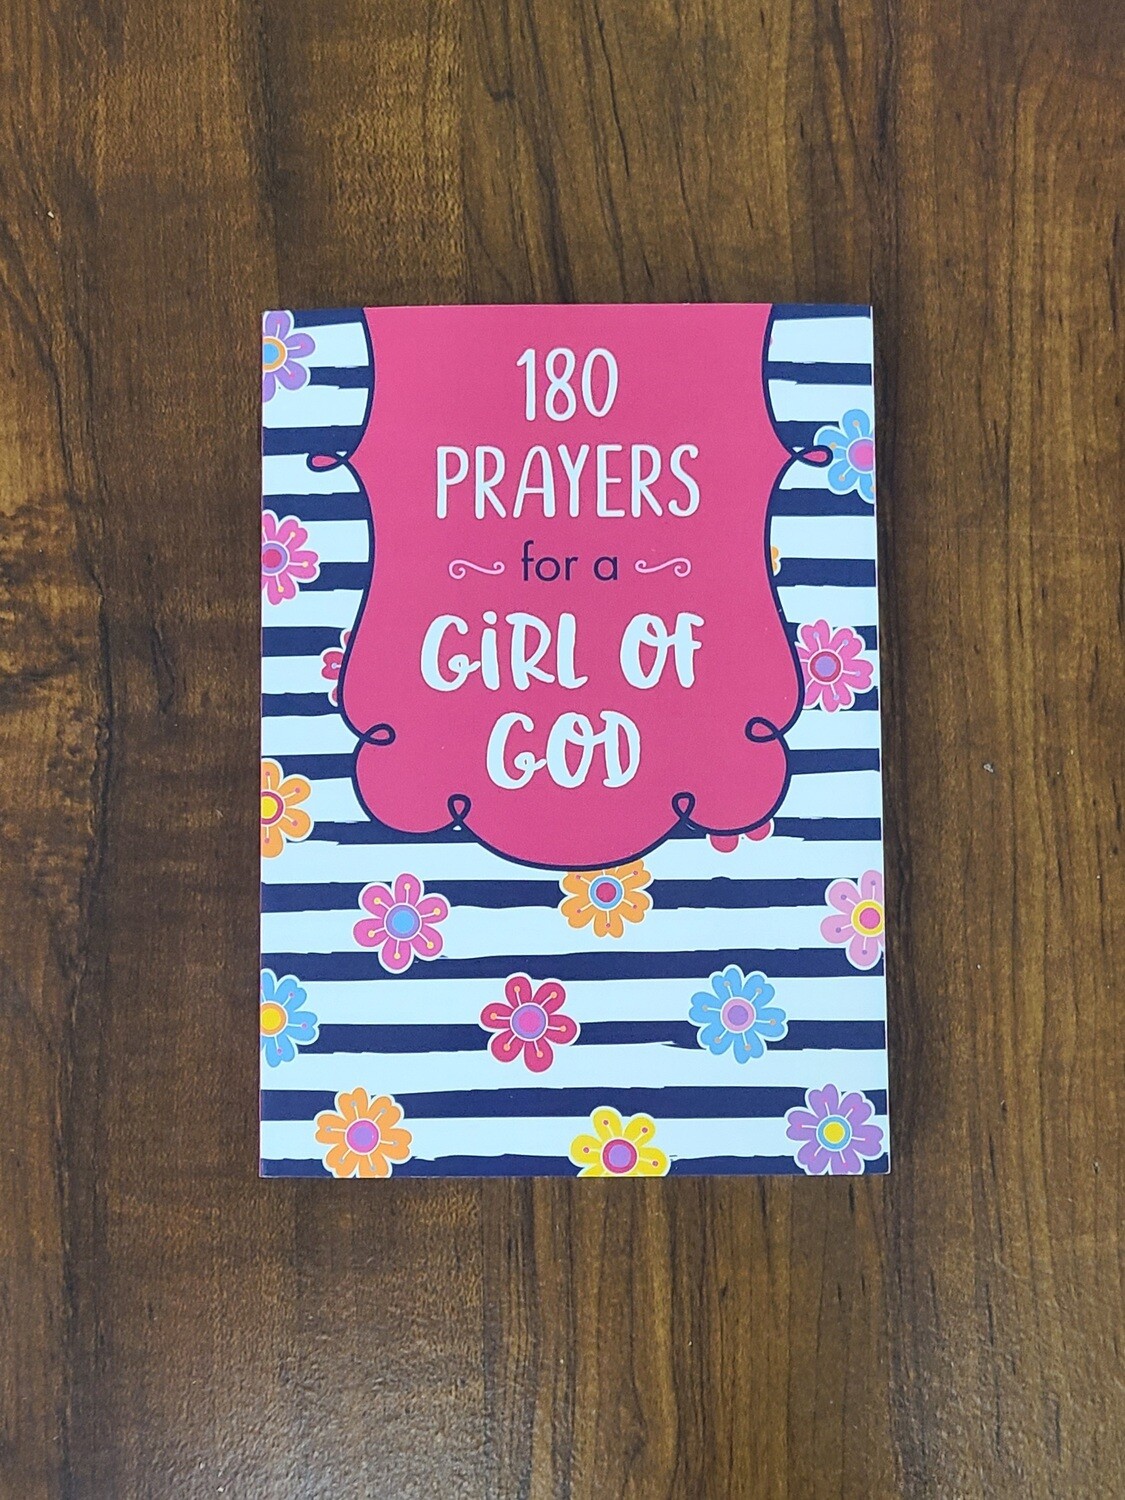 180 Prayers for a Girl of God by JoAnne Simmons